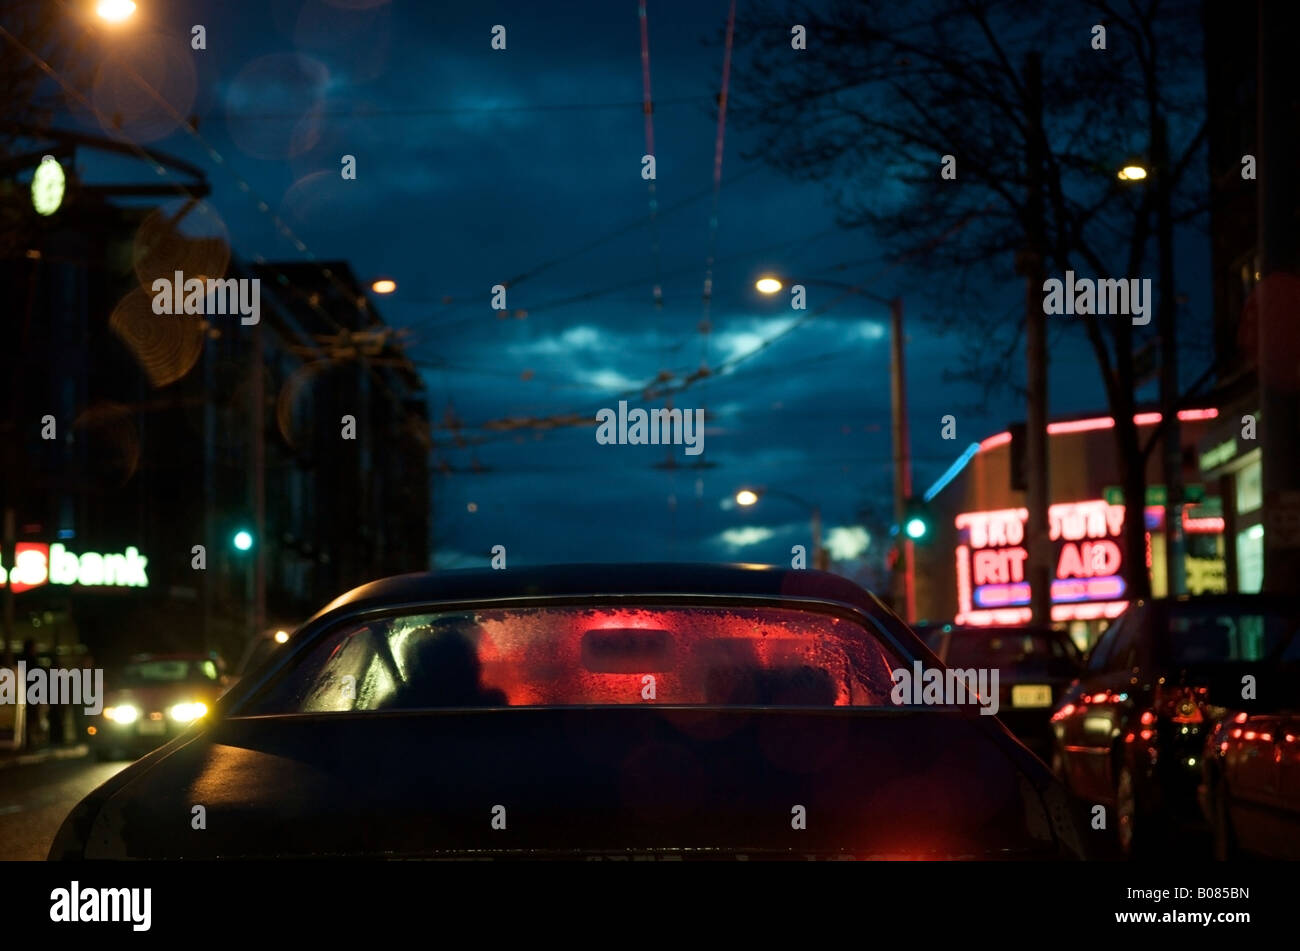 View of red brake lights through the rear window of a car on a rainy evening in Seattle, WA, USA. Stock Photo